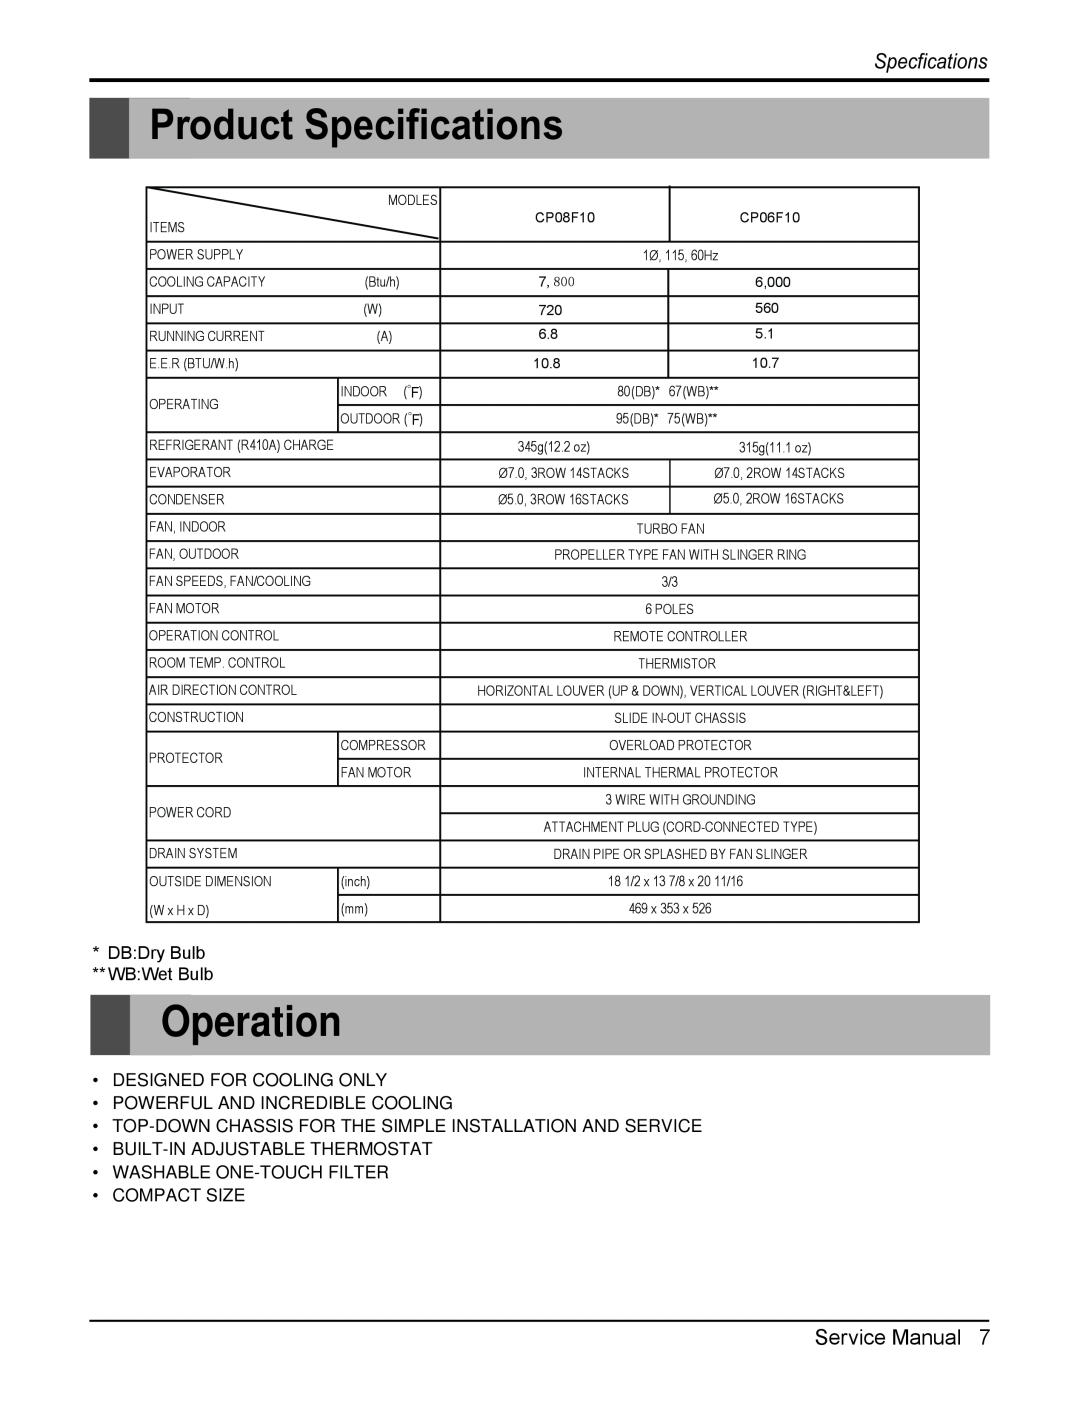 Friedrich CP08F10, CP06F10 manual Product Specifications, Operation, Specfications 